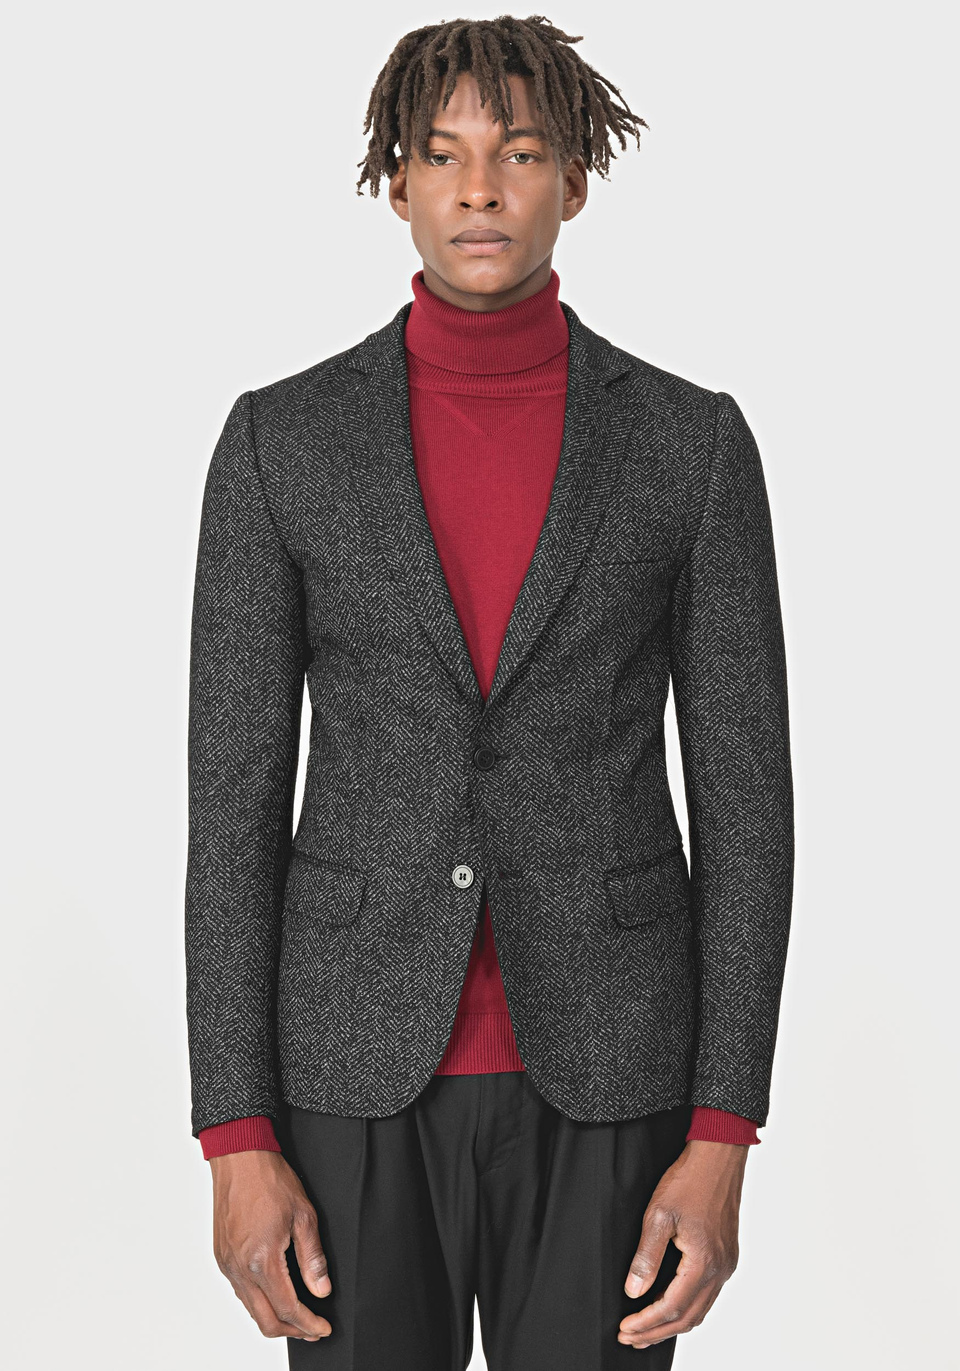 SUPER-SLIM-FIT “TRACY” JACKET IN A WOOL BLEND WITH A HERRINGBONE PATTERN - Antony Morato Online Shop